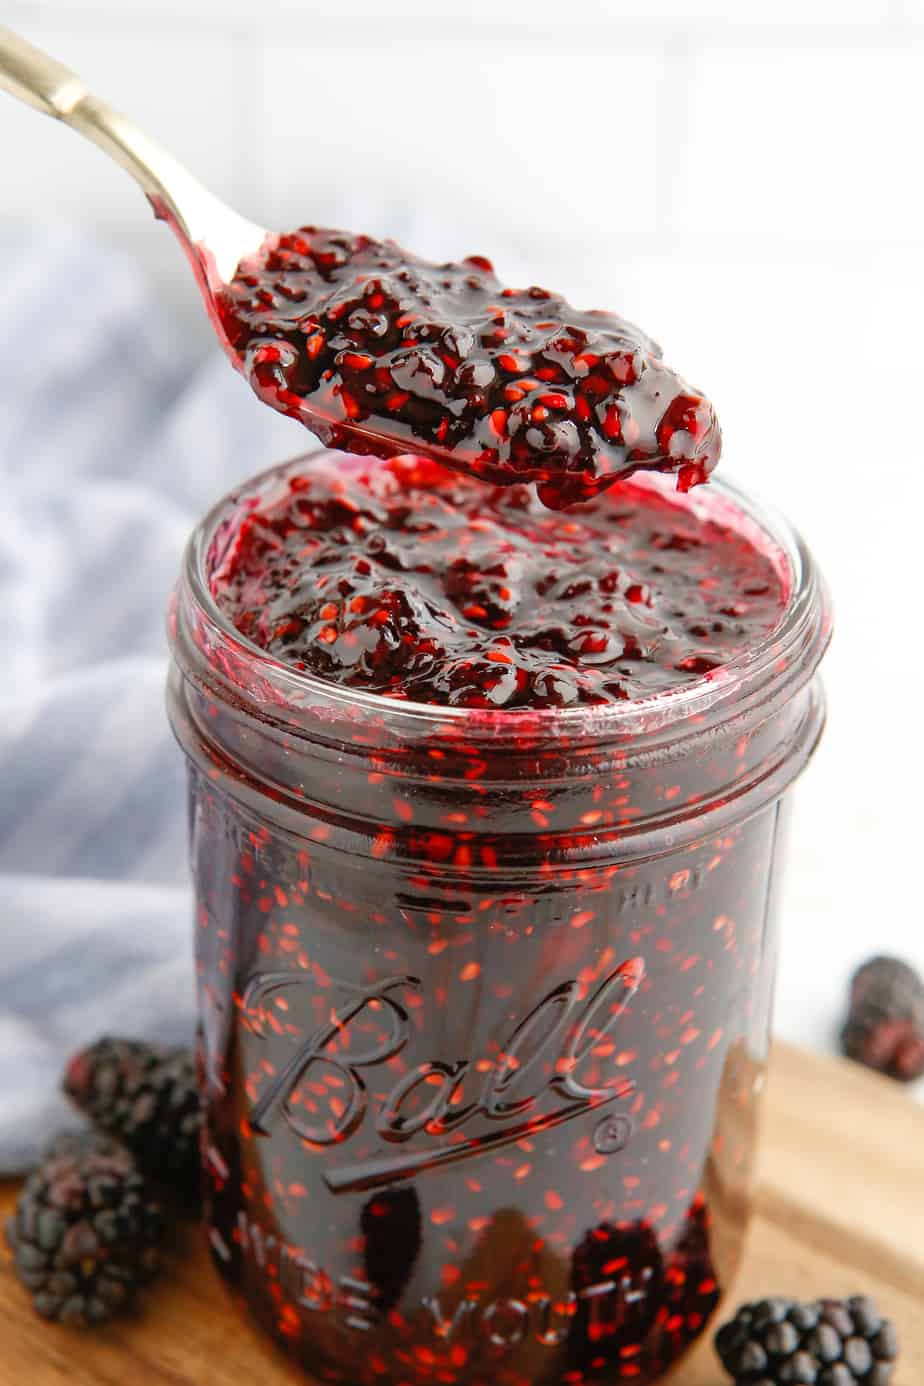 A spoon pulling a spoonful of blackberry jam from the top of a jar of jam from the side with fresh blackberries around the bottom of the jar.